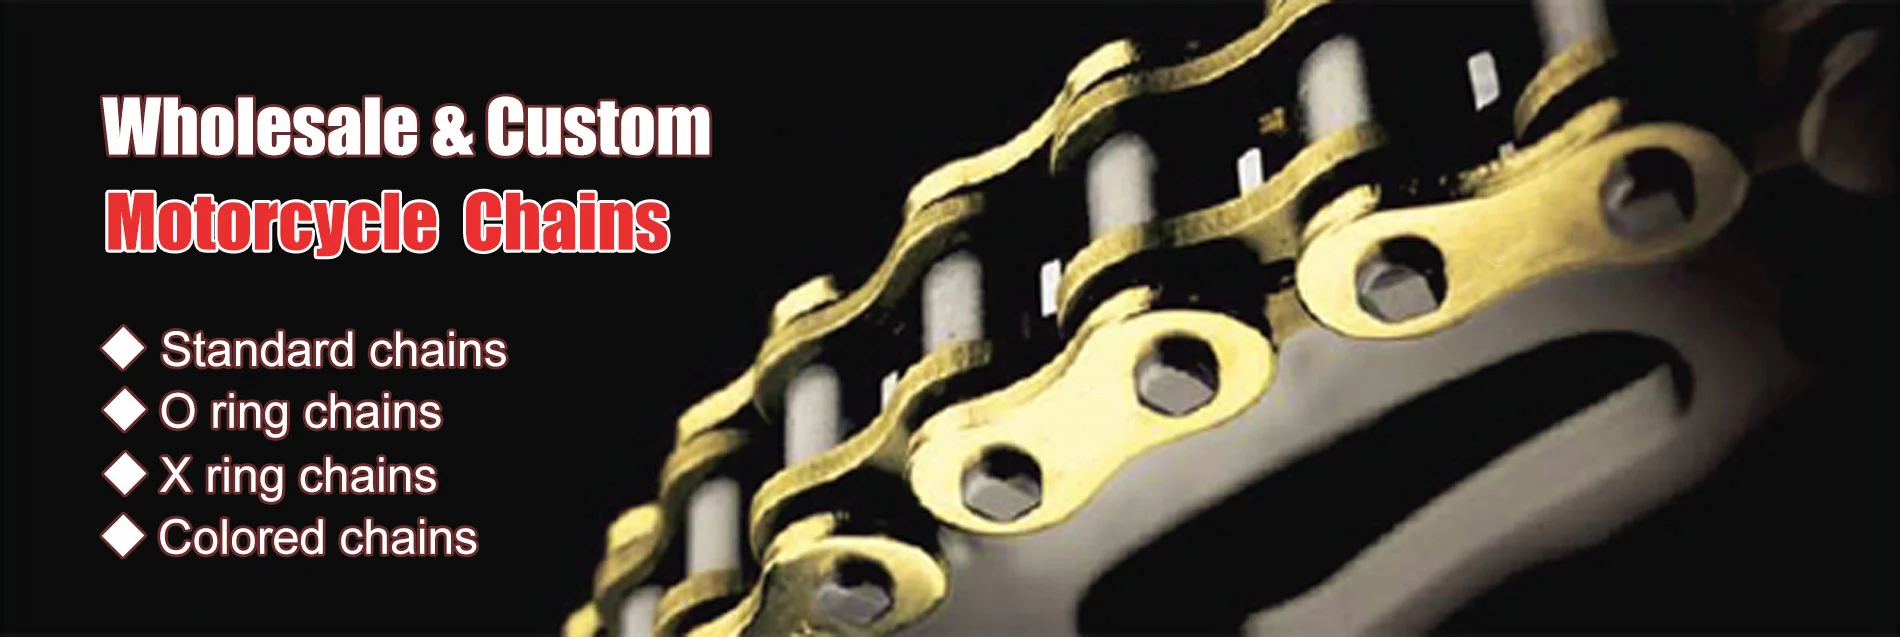 Motorcycle chains  /  O ring chains